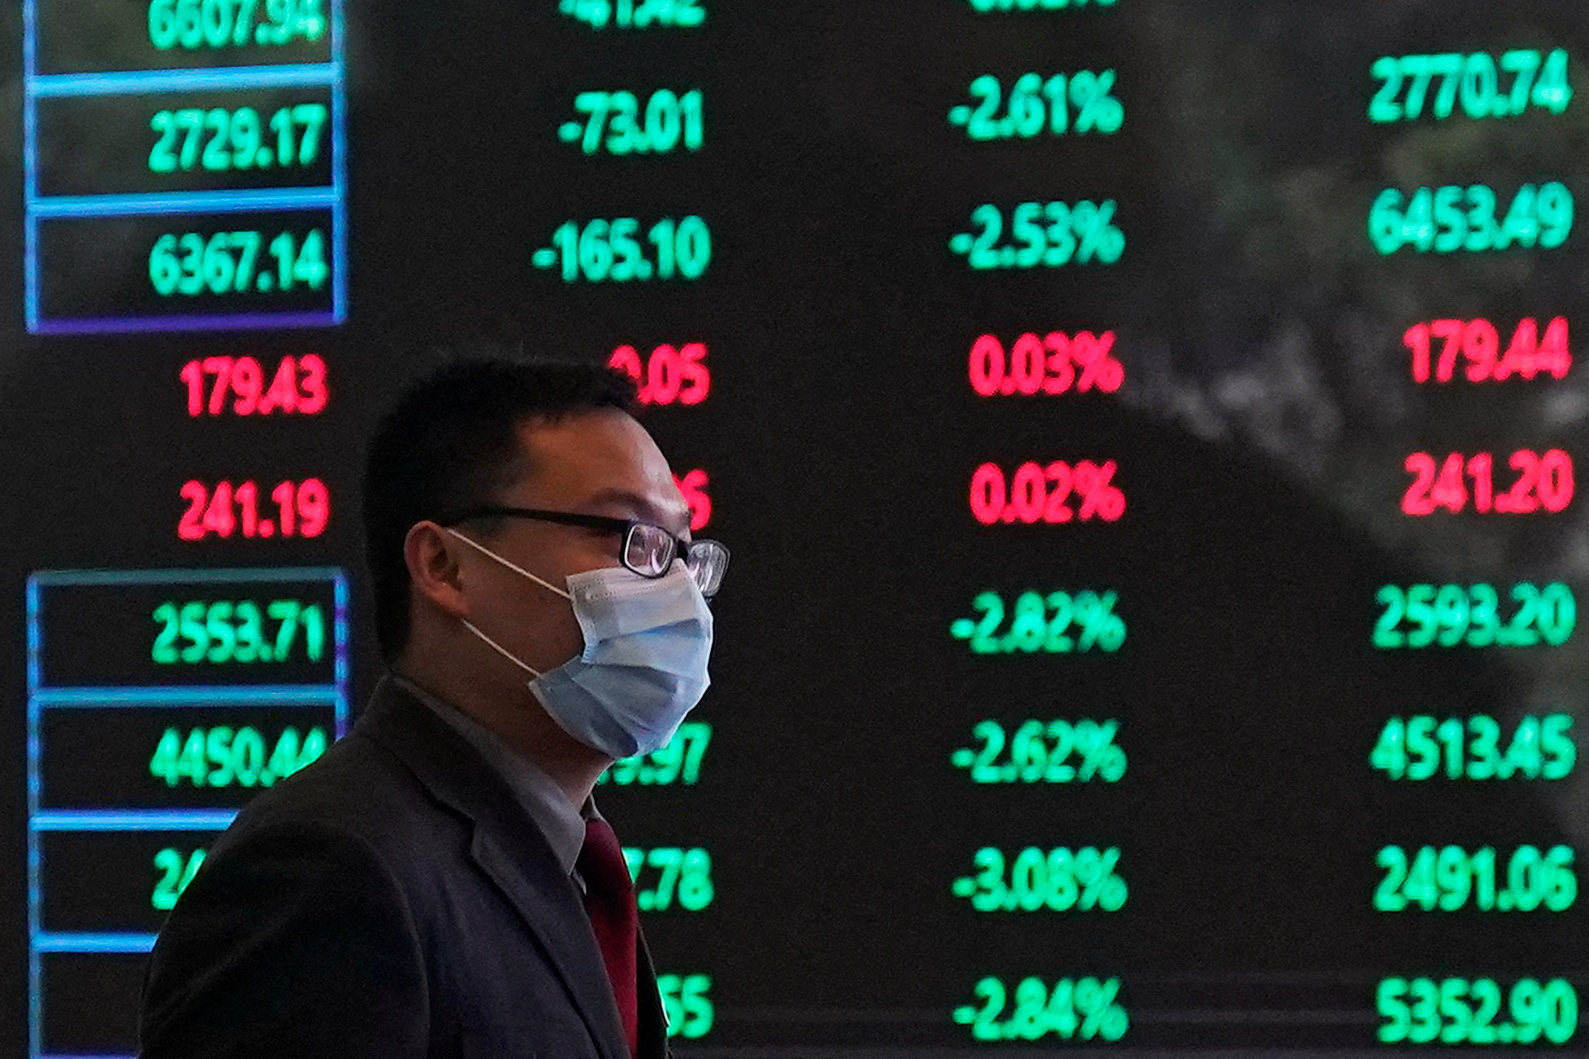 Chinese stocks have remained sluggish even after a barrage of supportive measures. Photo: Reuters